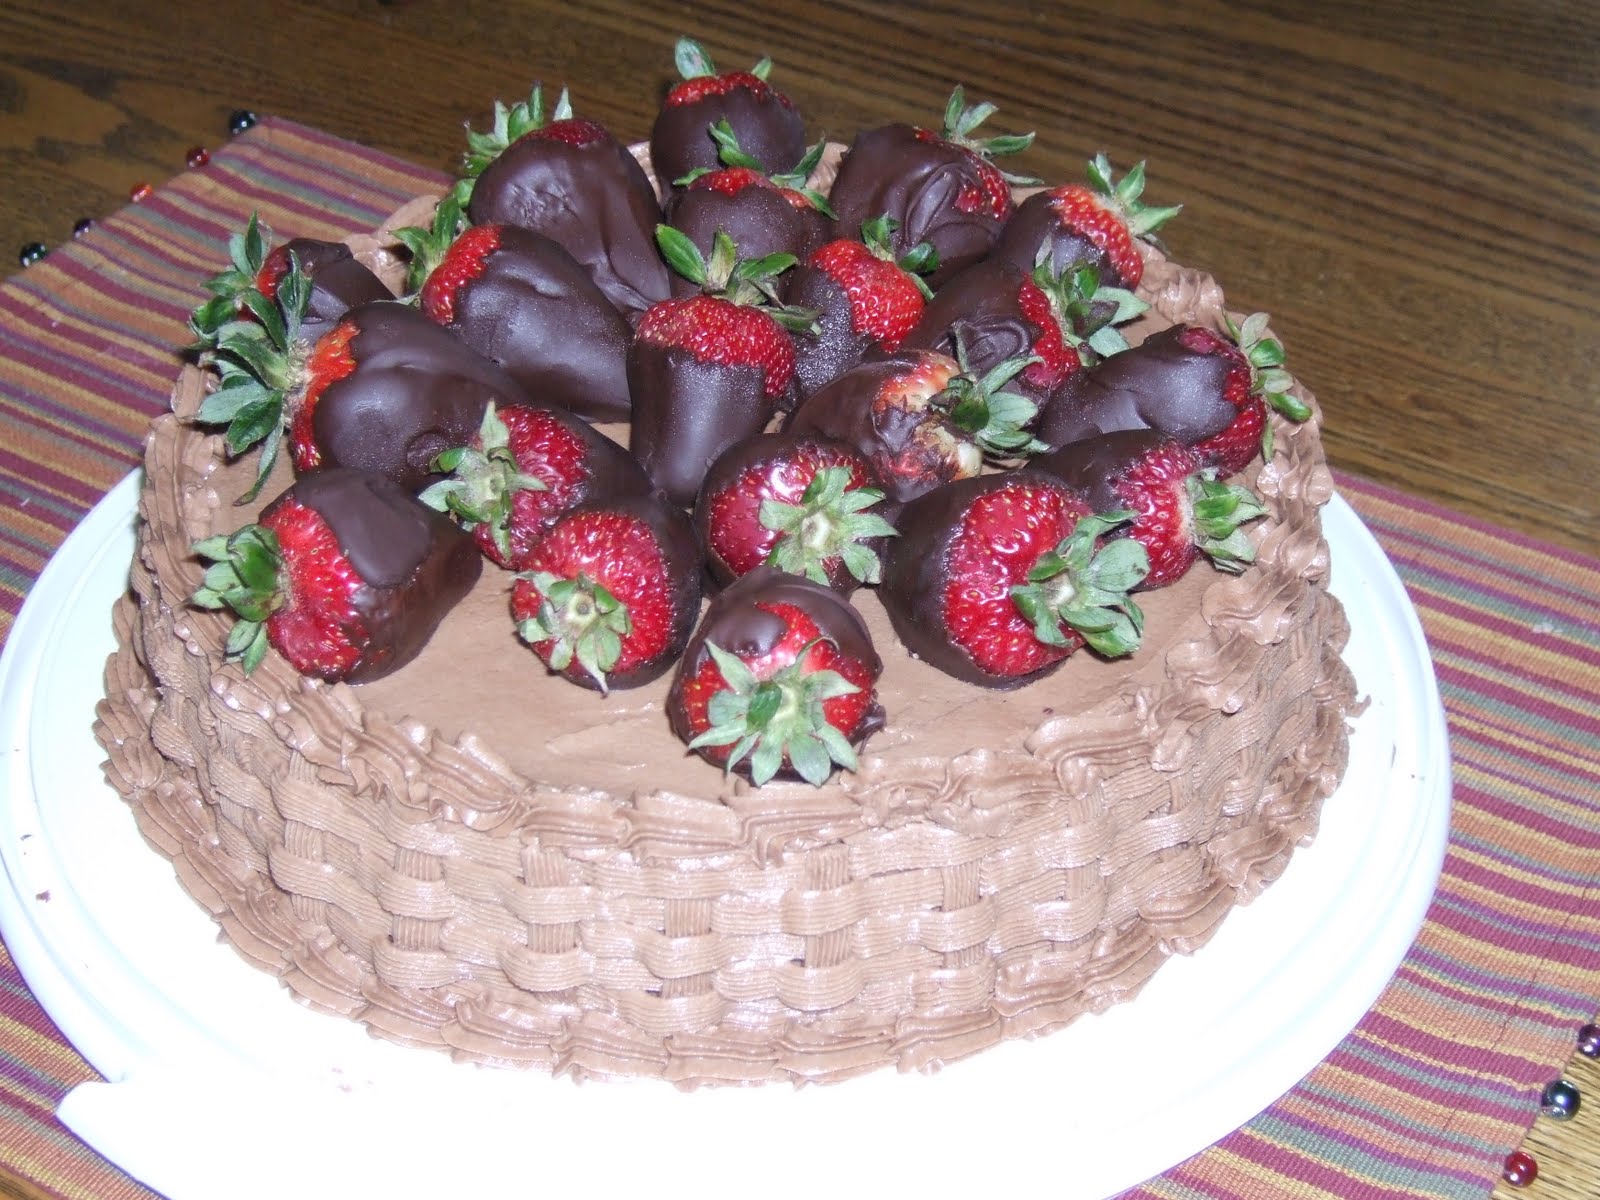 chocolate cake with strawberries day cake makes me drool chocolate cake caramel filling chocolate 